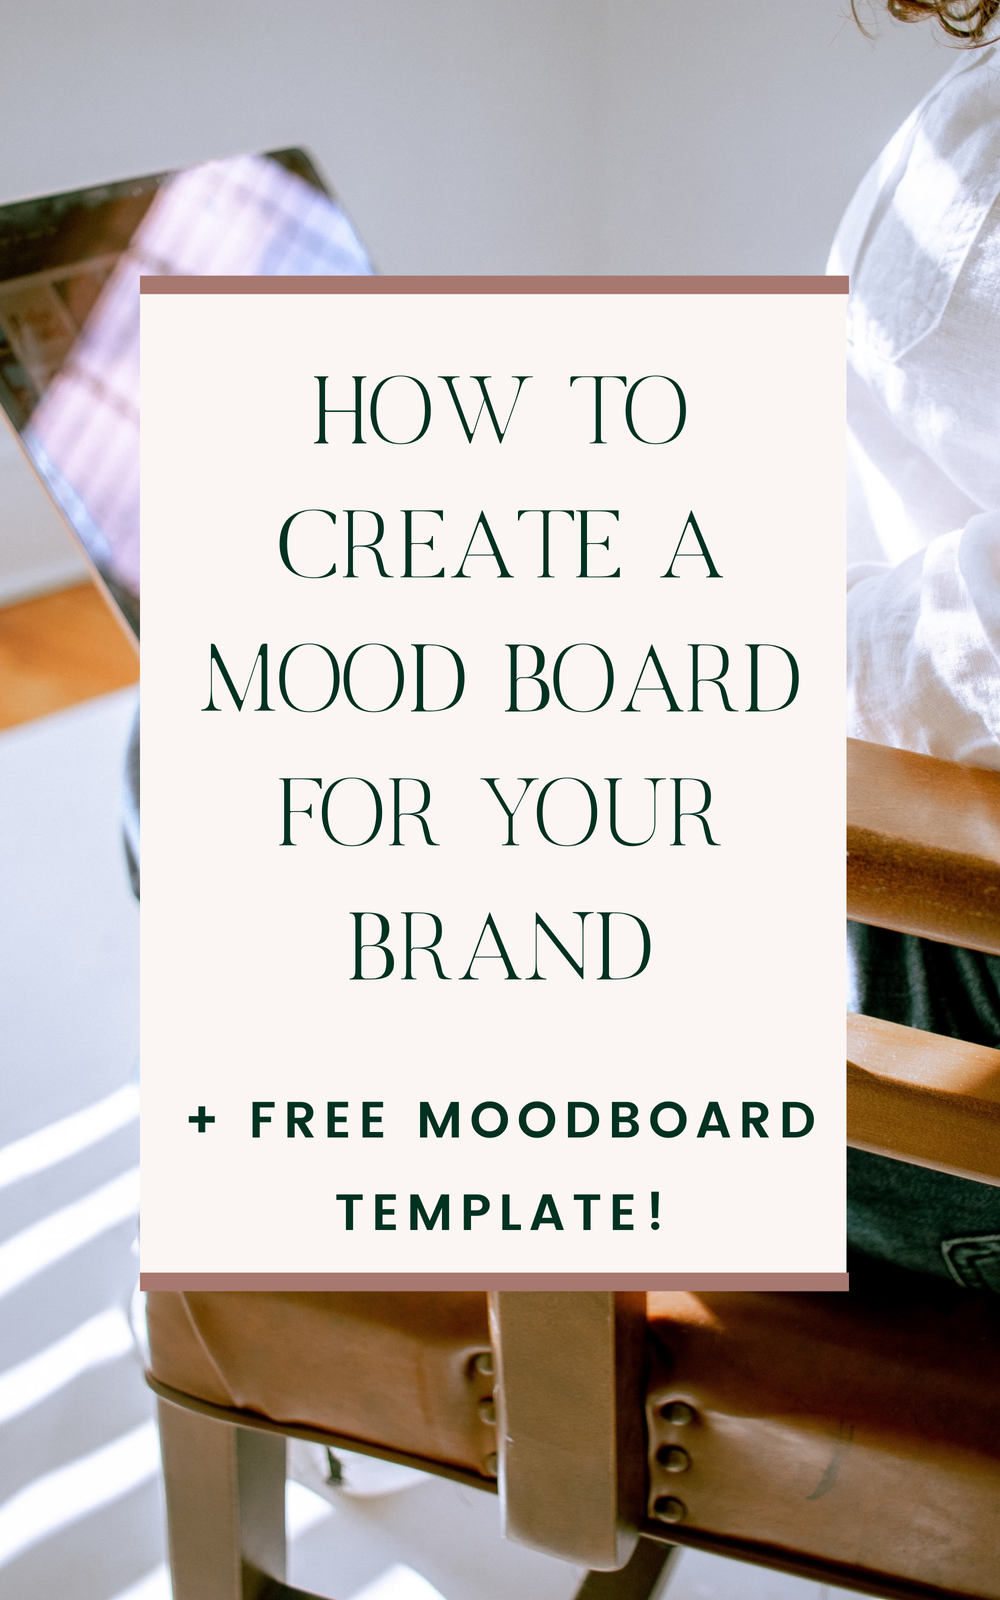 HOW TO CREATE A MOOD BOARD FOR YOUR BRAND — Jannan Poppen